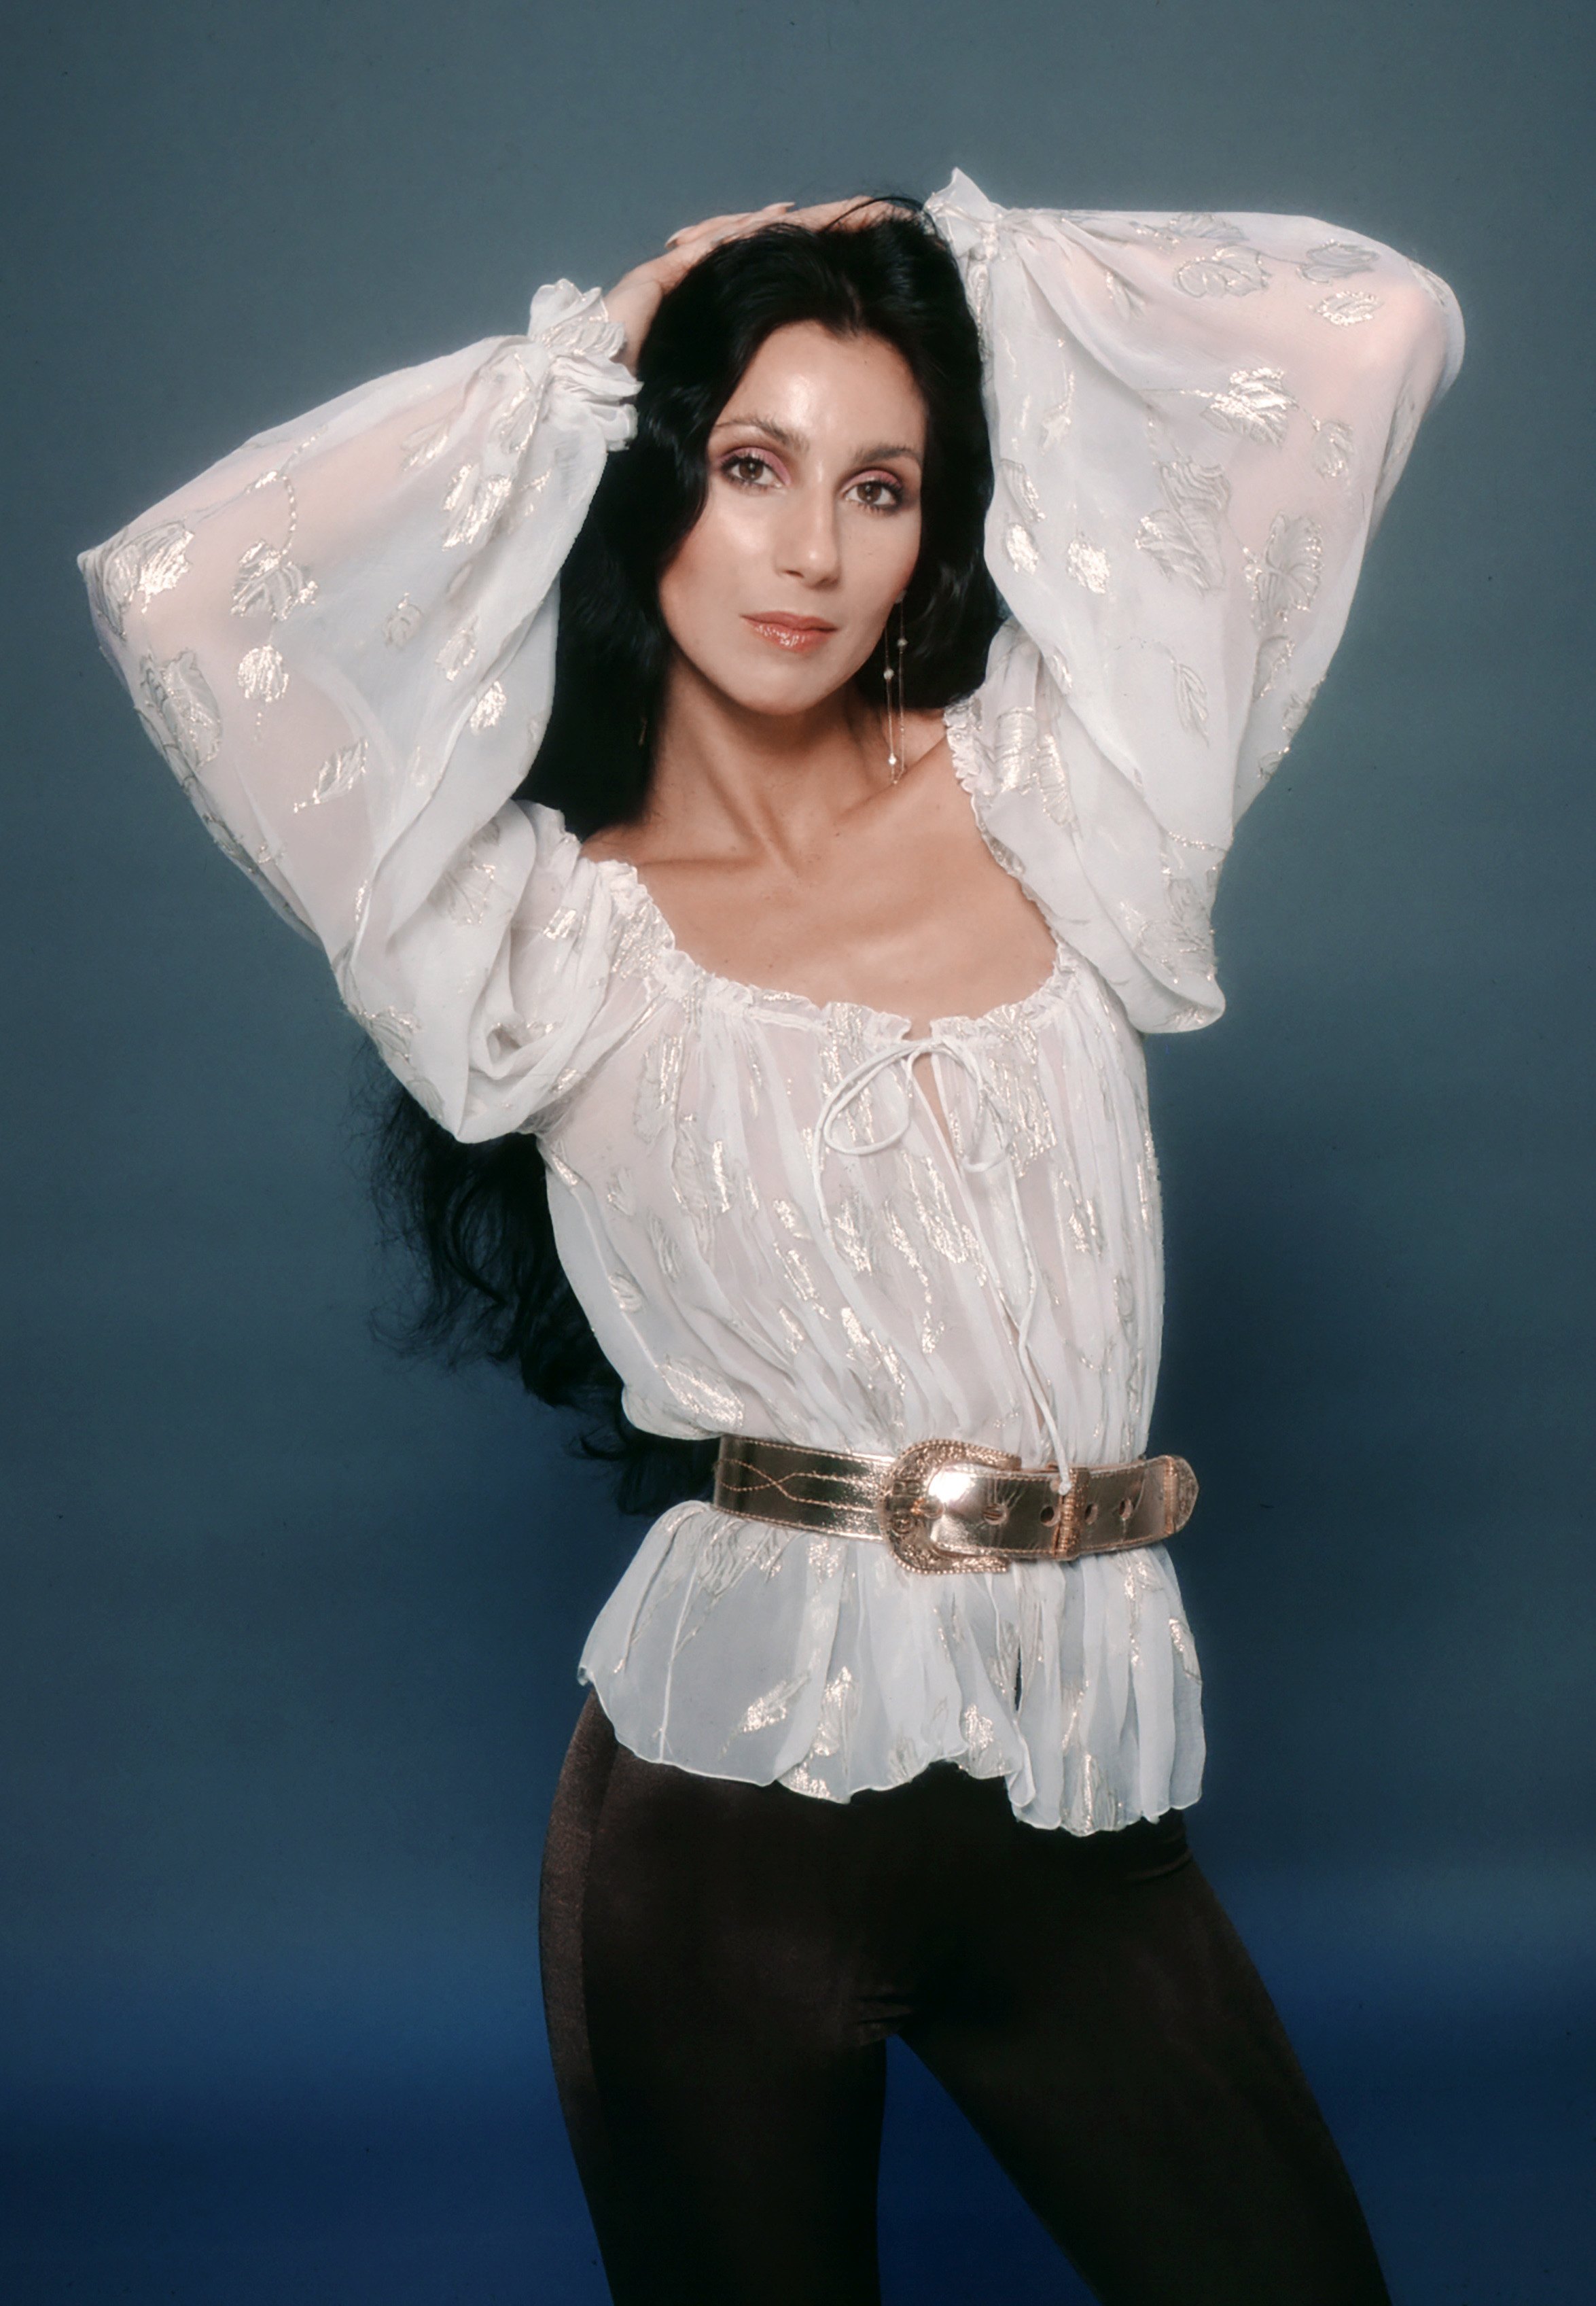 Cher poses for a portrait on March 9, 1978 in Los Angeles, California | Source: Getty Images